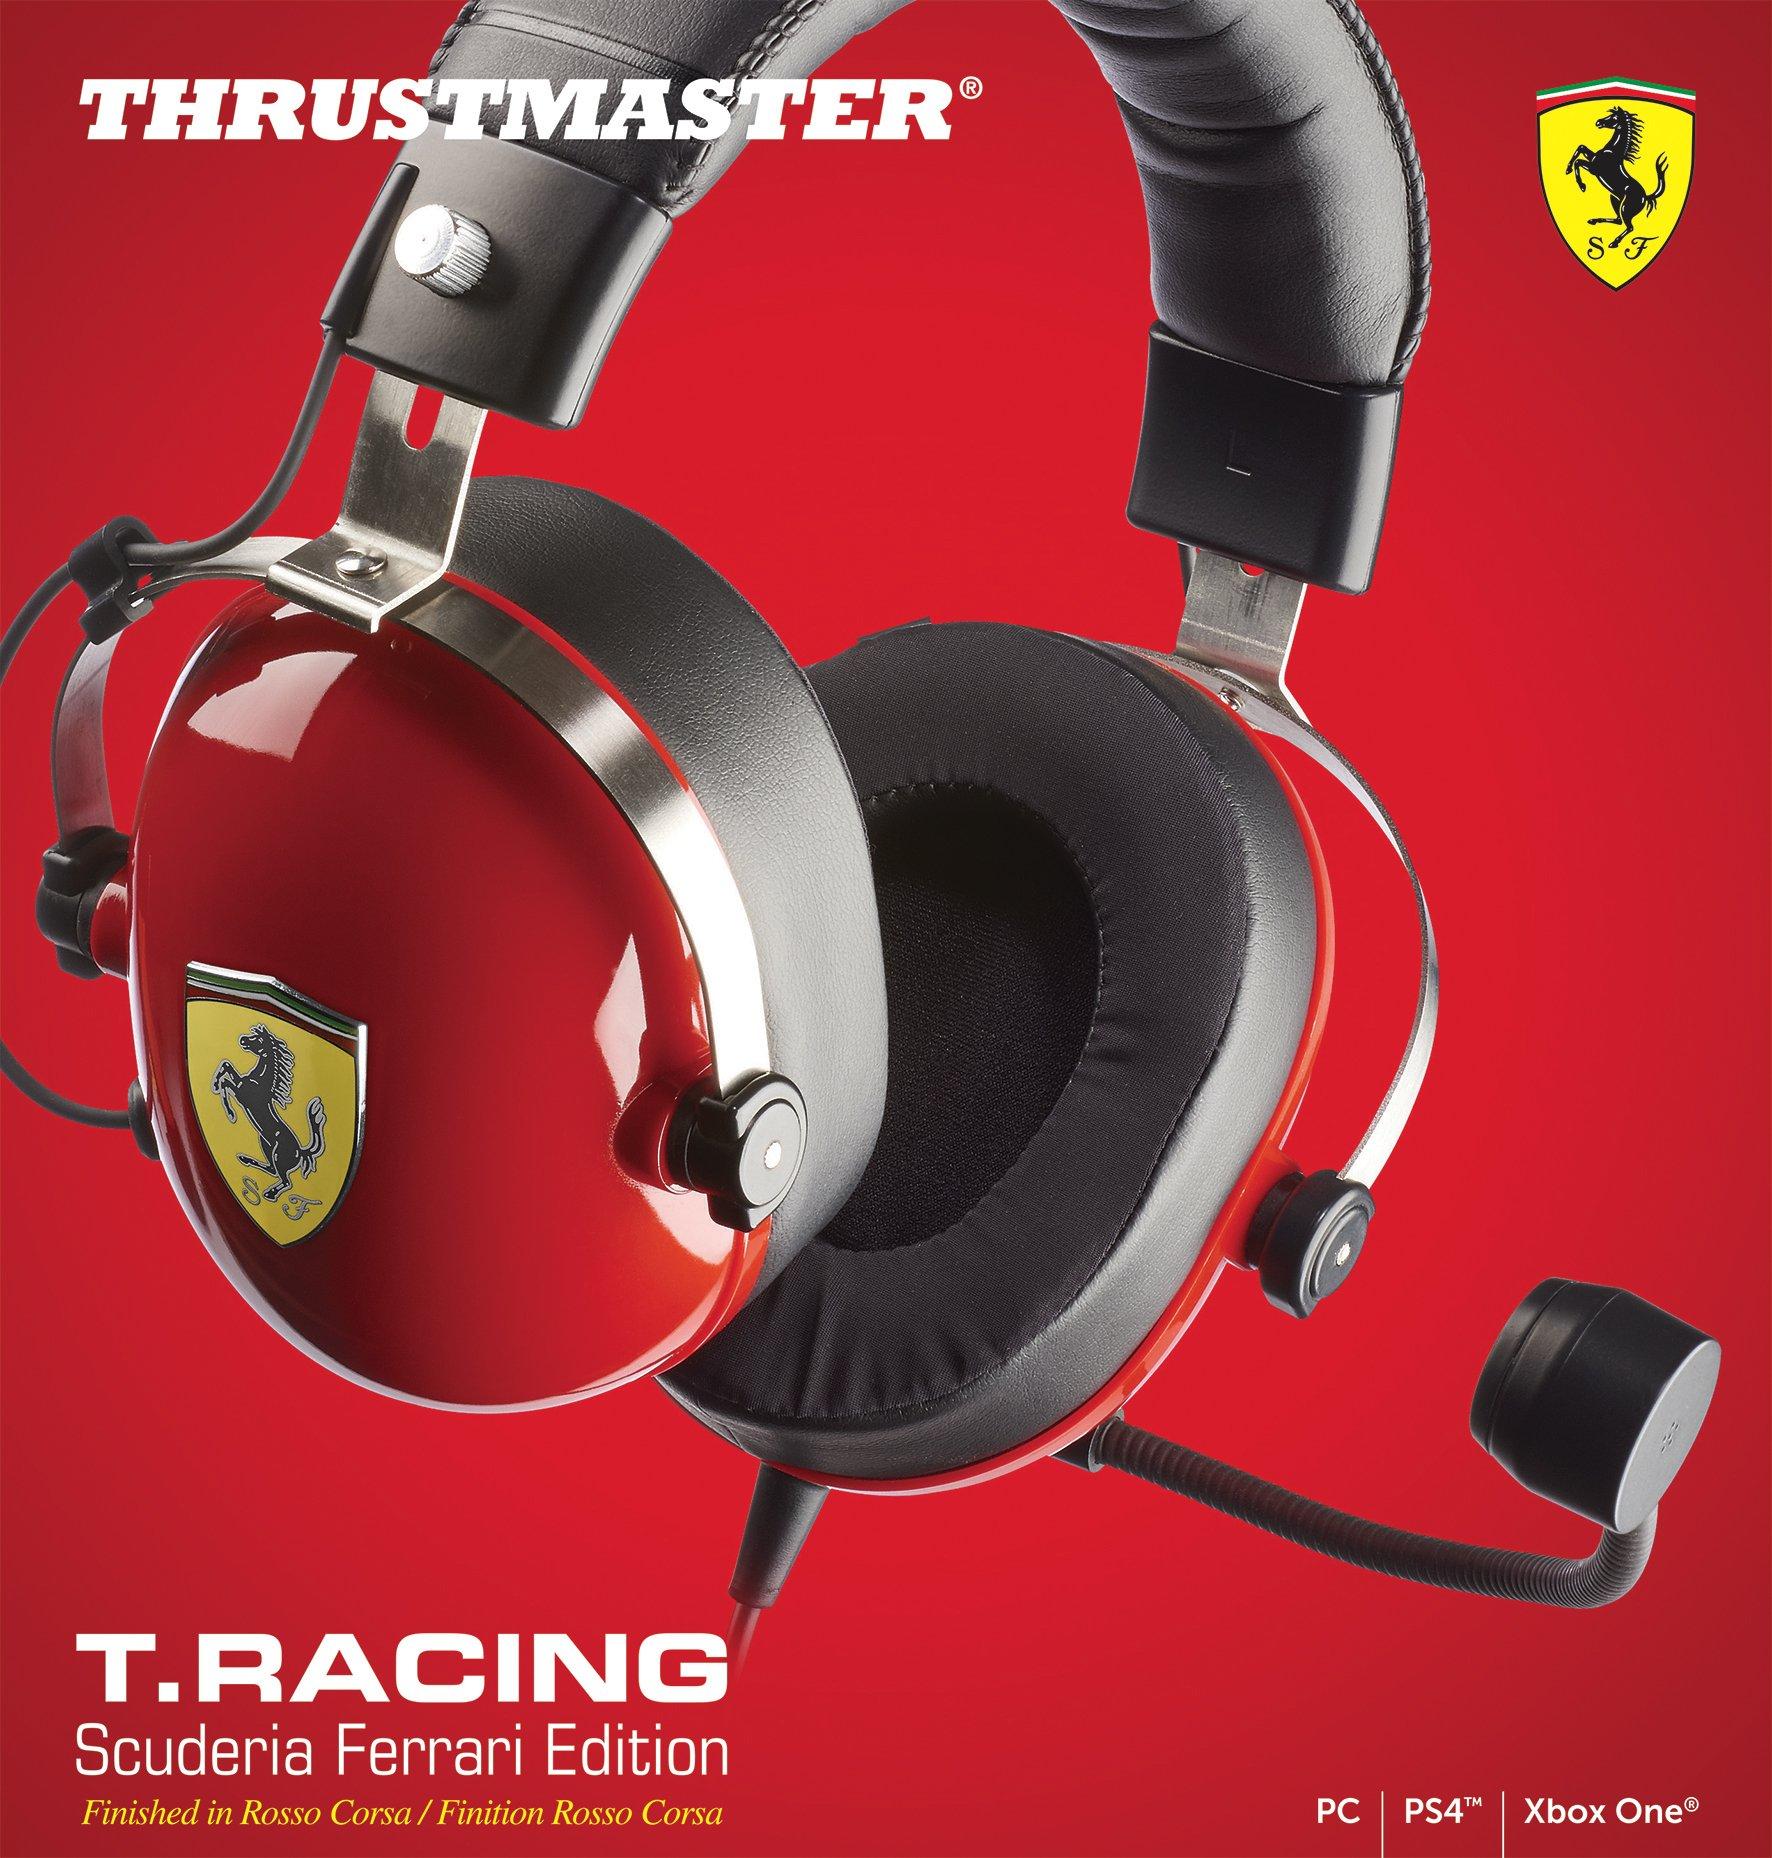 PS4, | | Universal Xbox PC, Universal for Gaming One Ferrari Thrustmaster GameStop Scuderia Headset T.Racing Edition